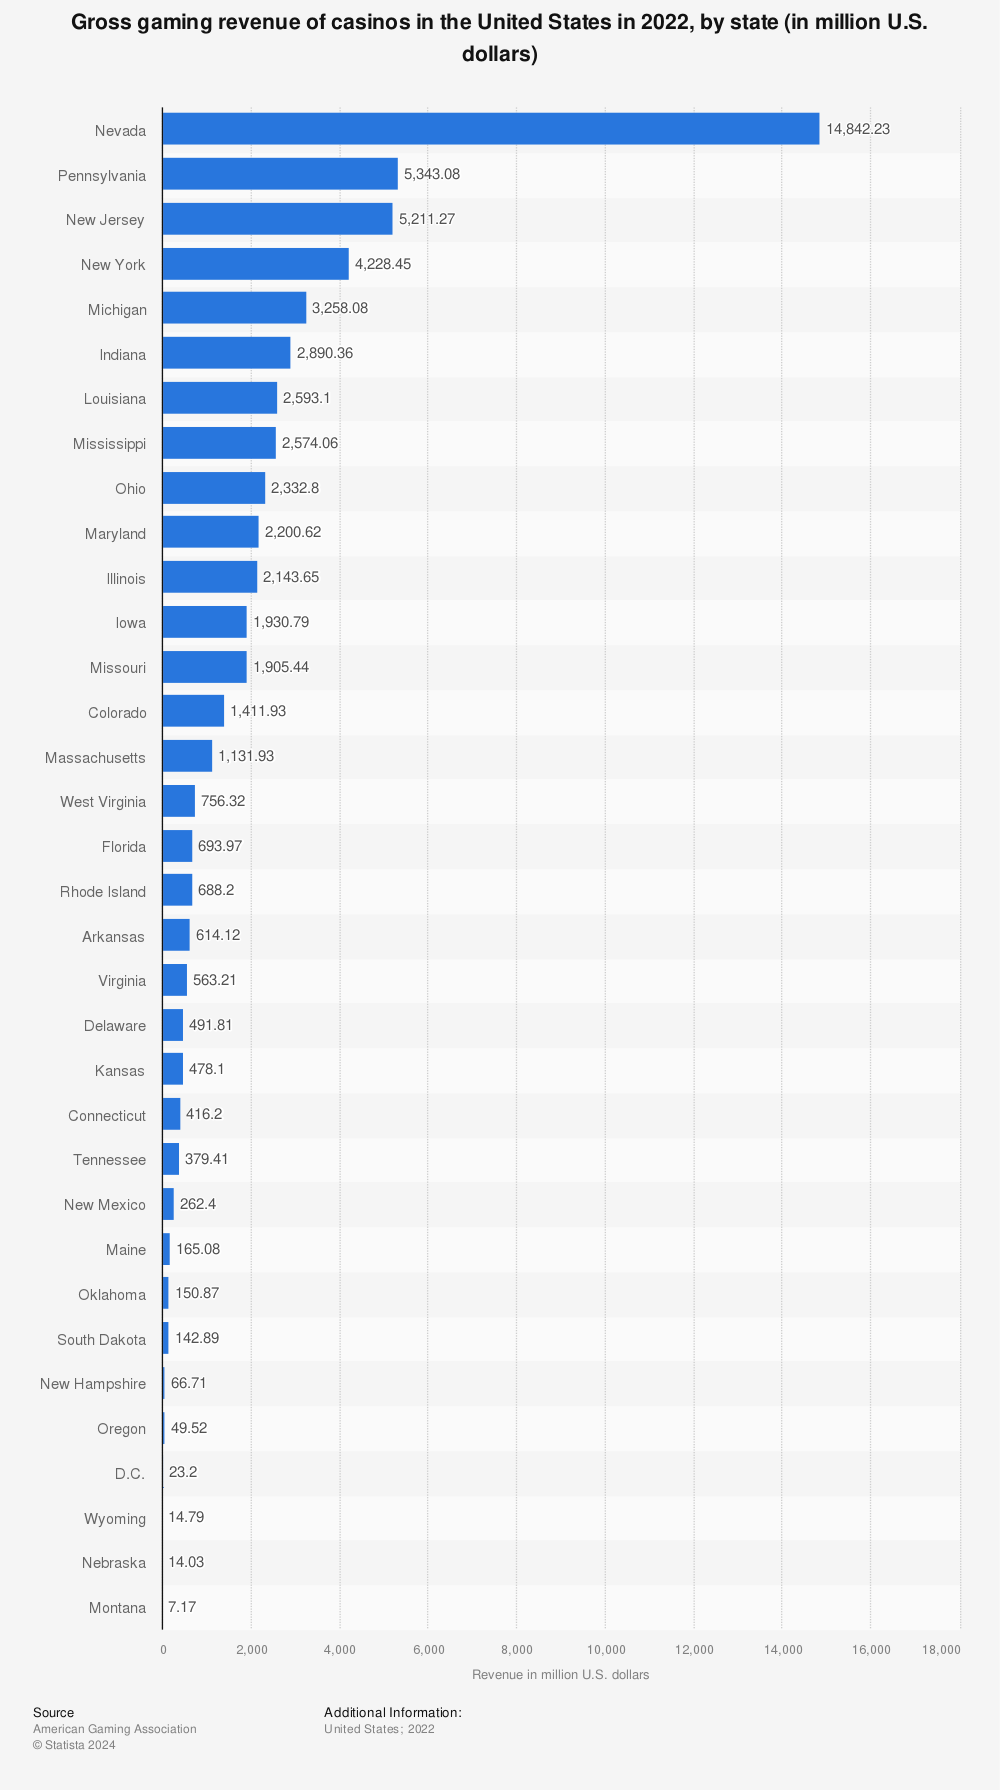 Statistic: Gross gaming revenue of casinos in the United States in 2021, by state (in million U.S. dollars) | Statista